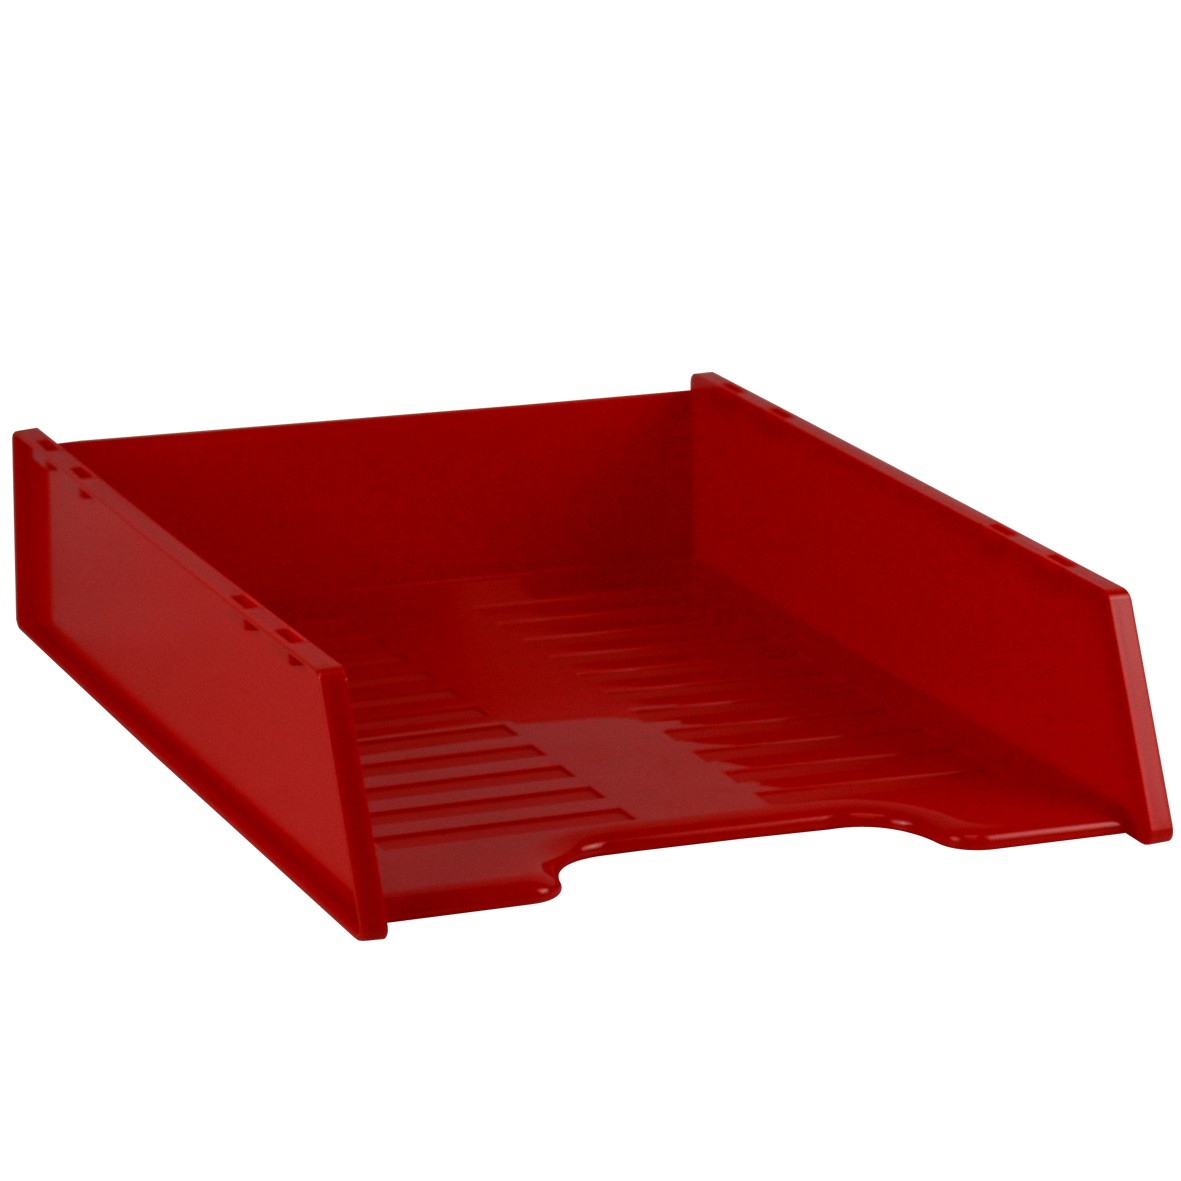 DOCUMENT TRAY STACKABLE ITALPLAST RED #I-60RED 